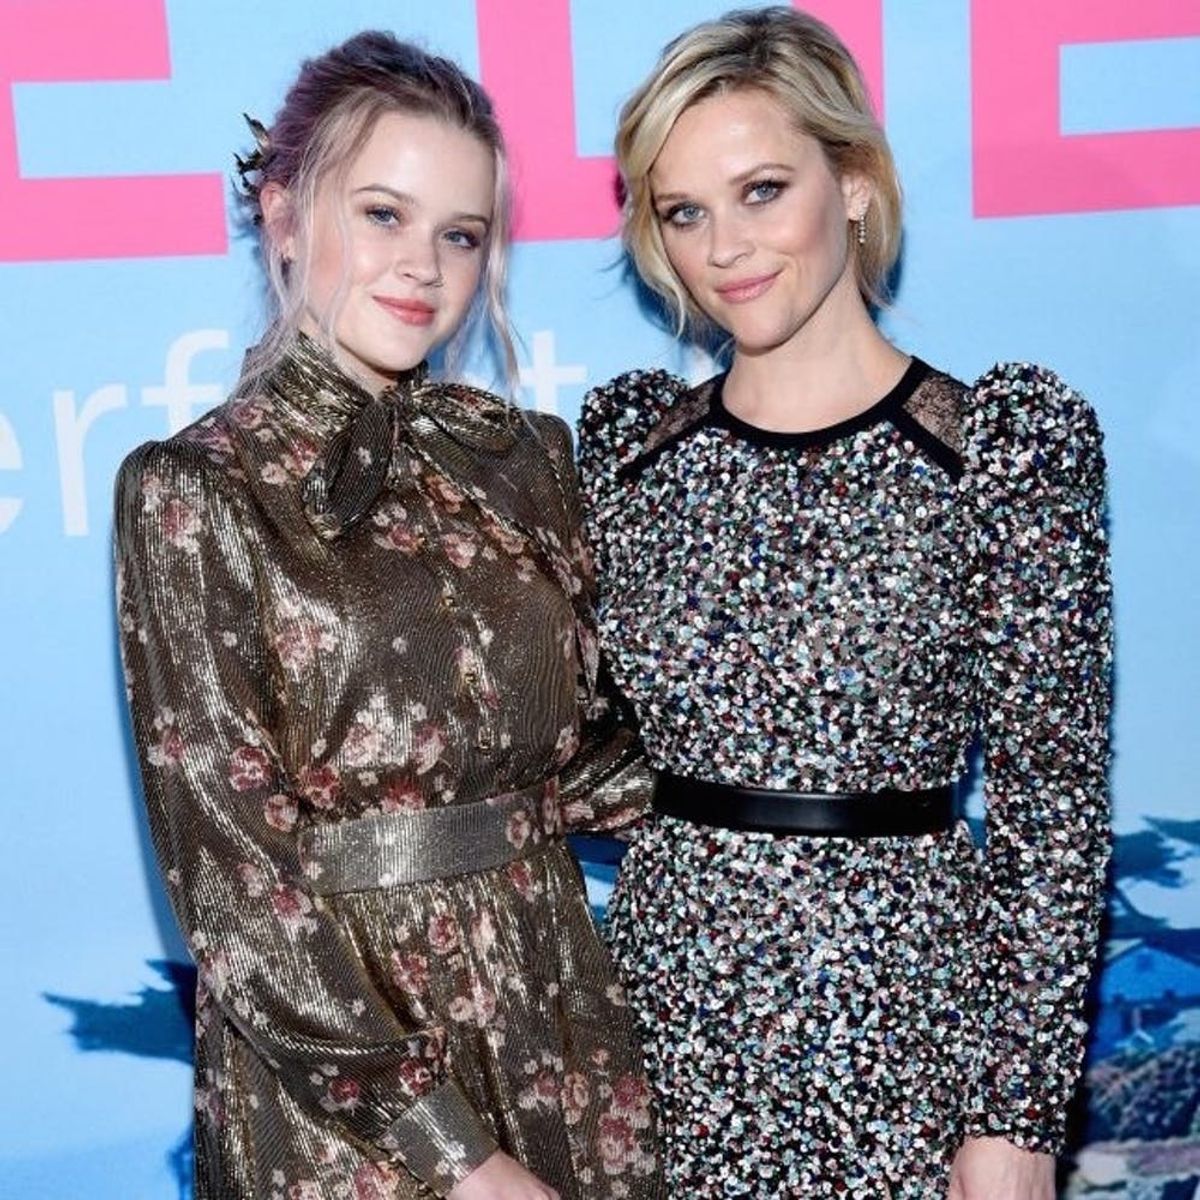 Reese Witherspoon, Daughter Ava Phillippe Look Like Twins on Red Carpet